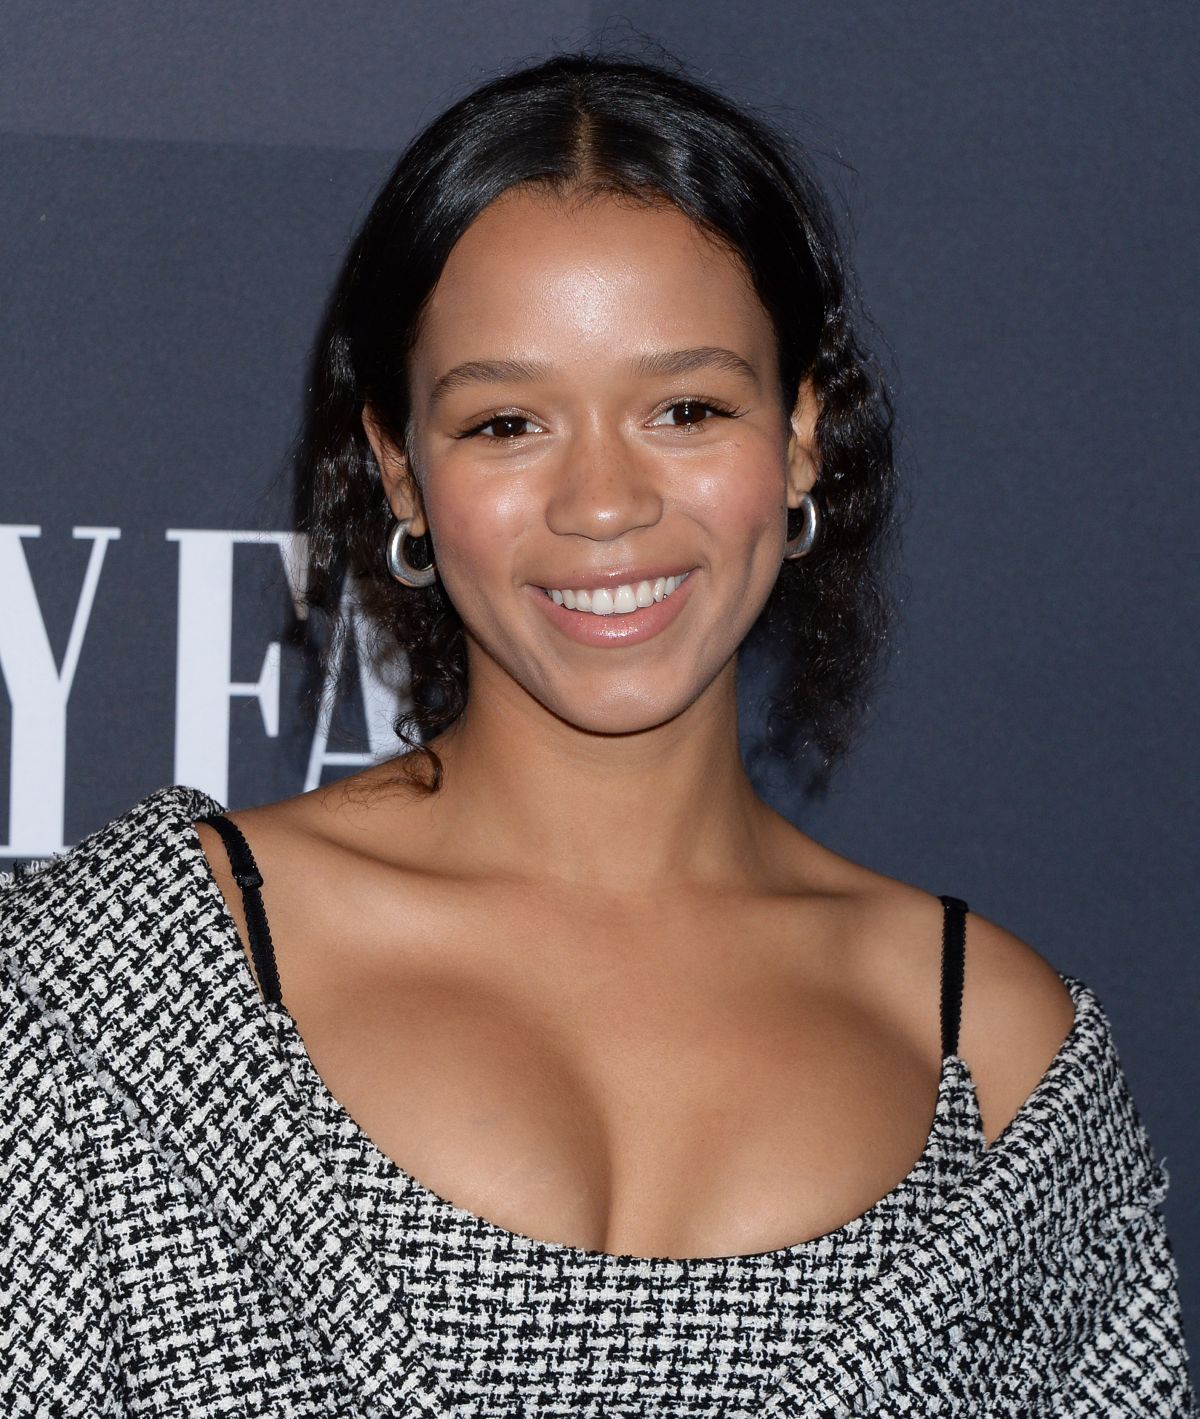 TAYLOR RUSSELL at Vanity Fair: Hollywood Calling Opening in Century City 02...